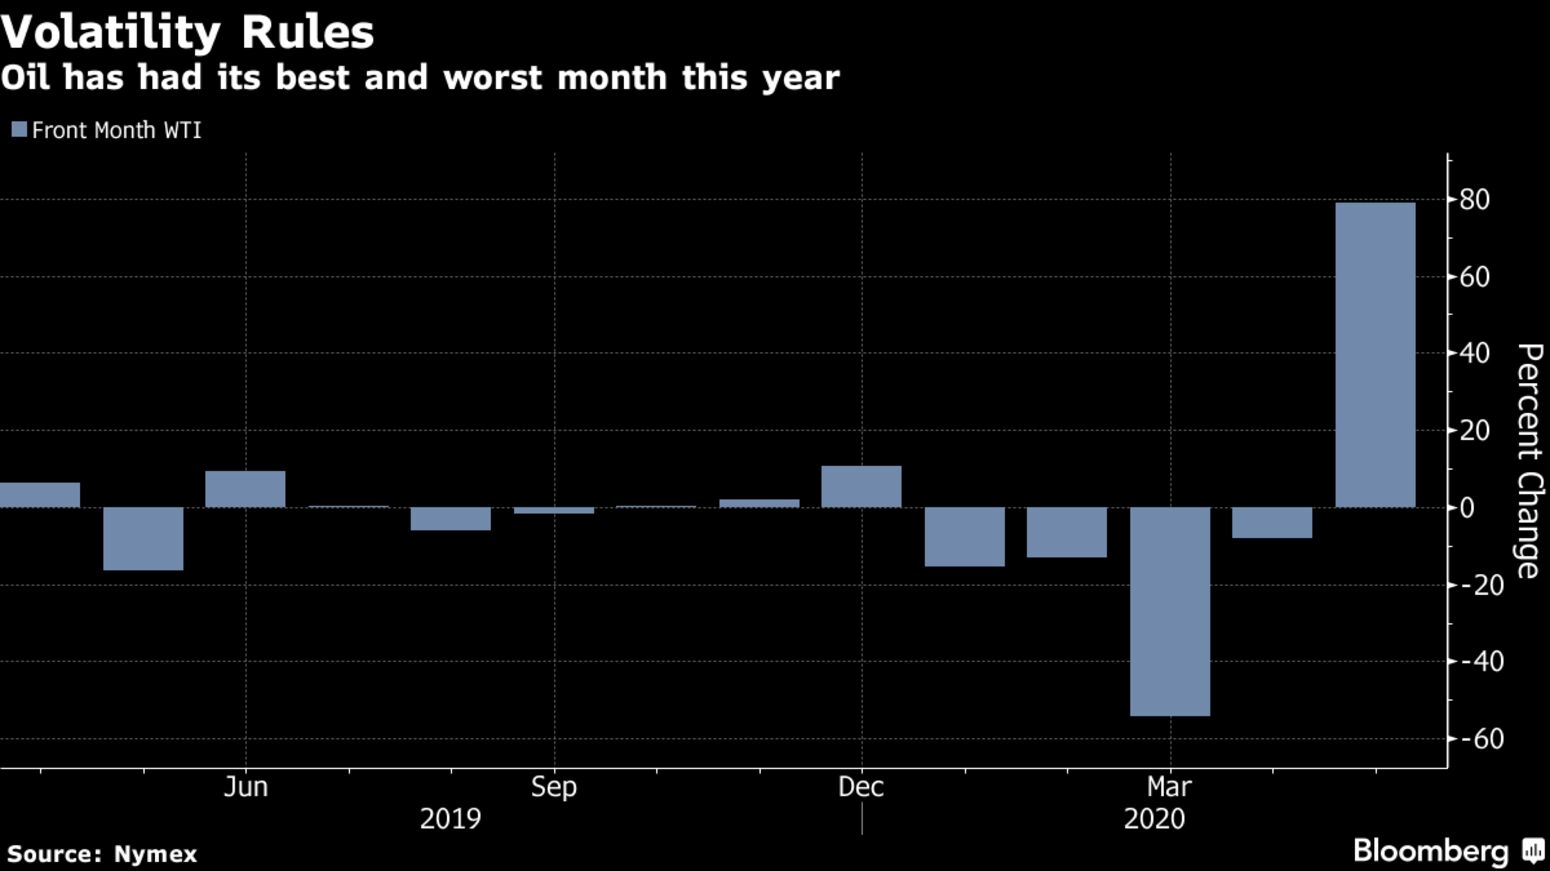 Oil has had its best and worst month this year